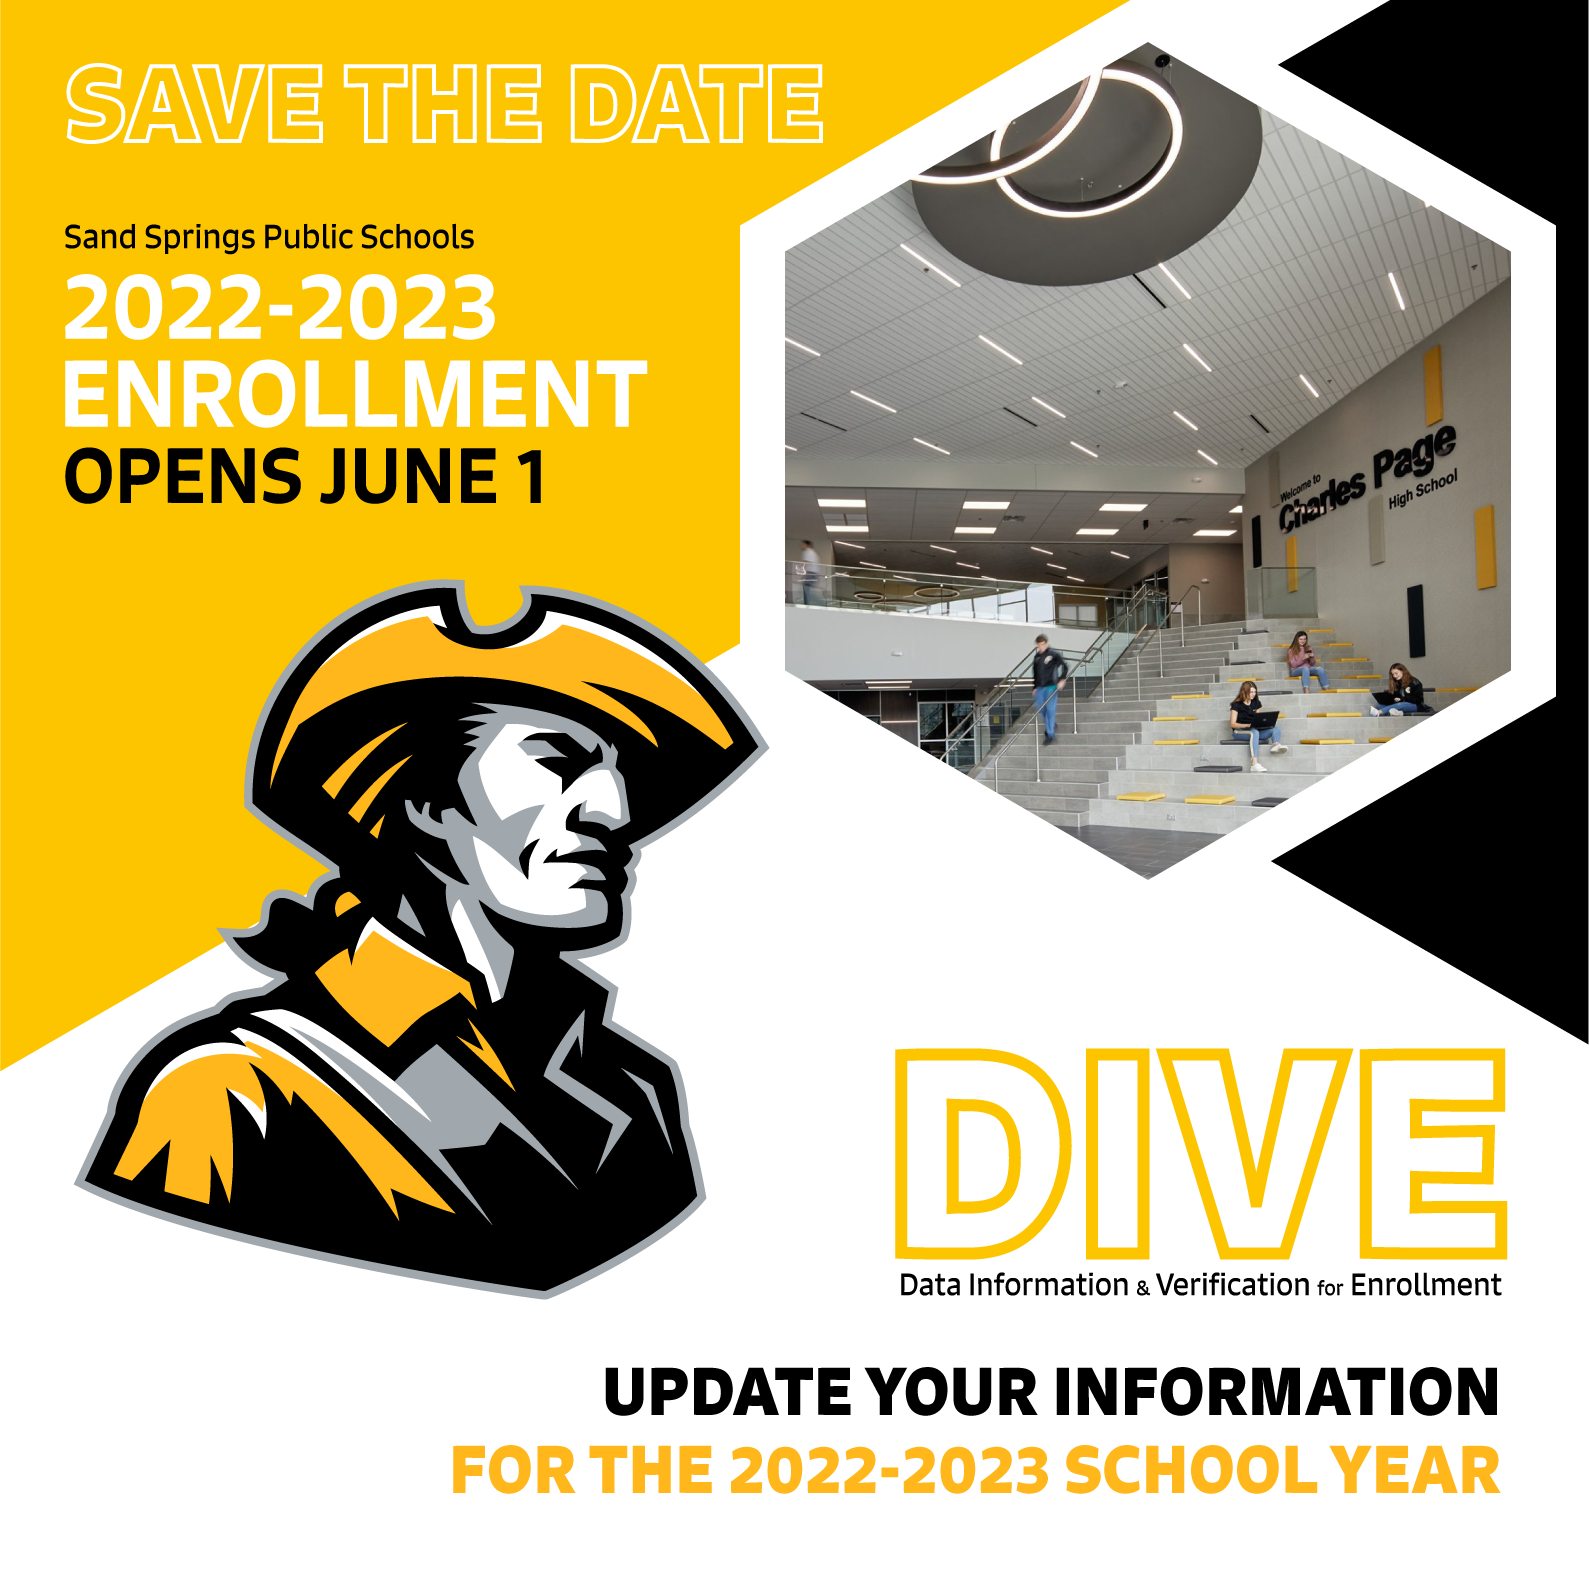 Save the Date - Enrollment for 2022-23 School Year Begins June 1